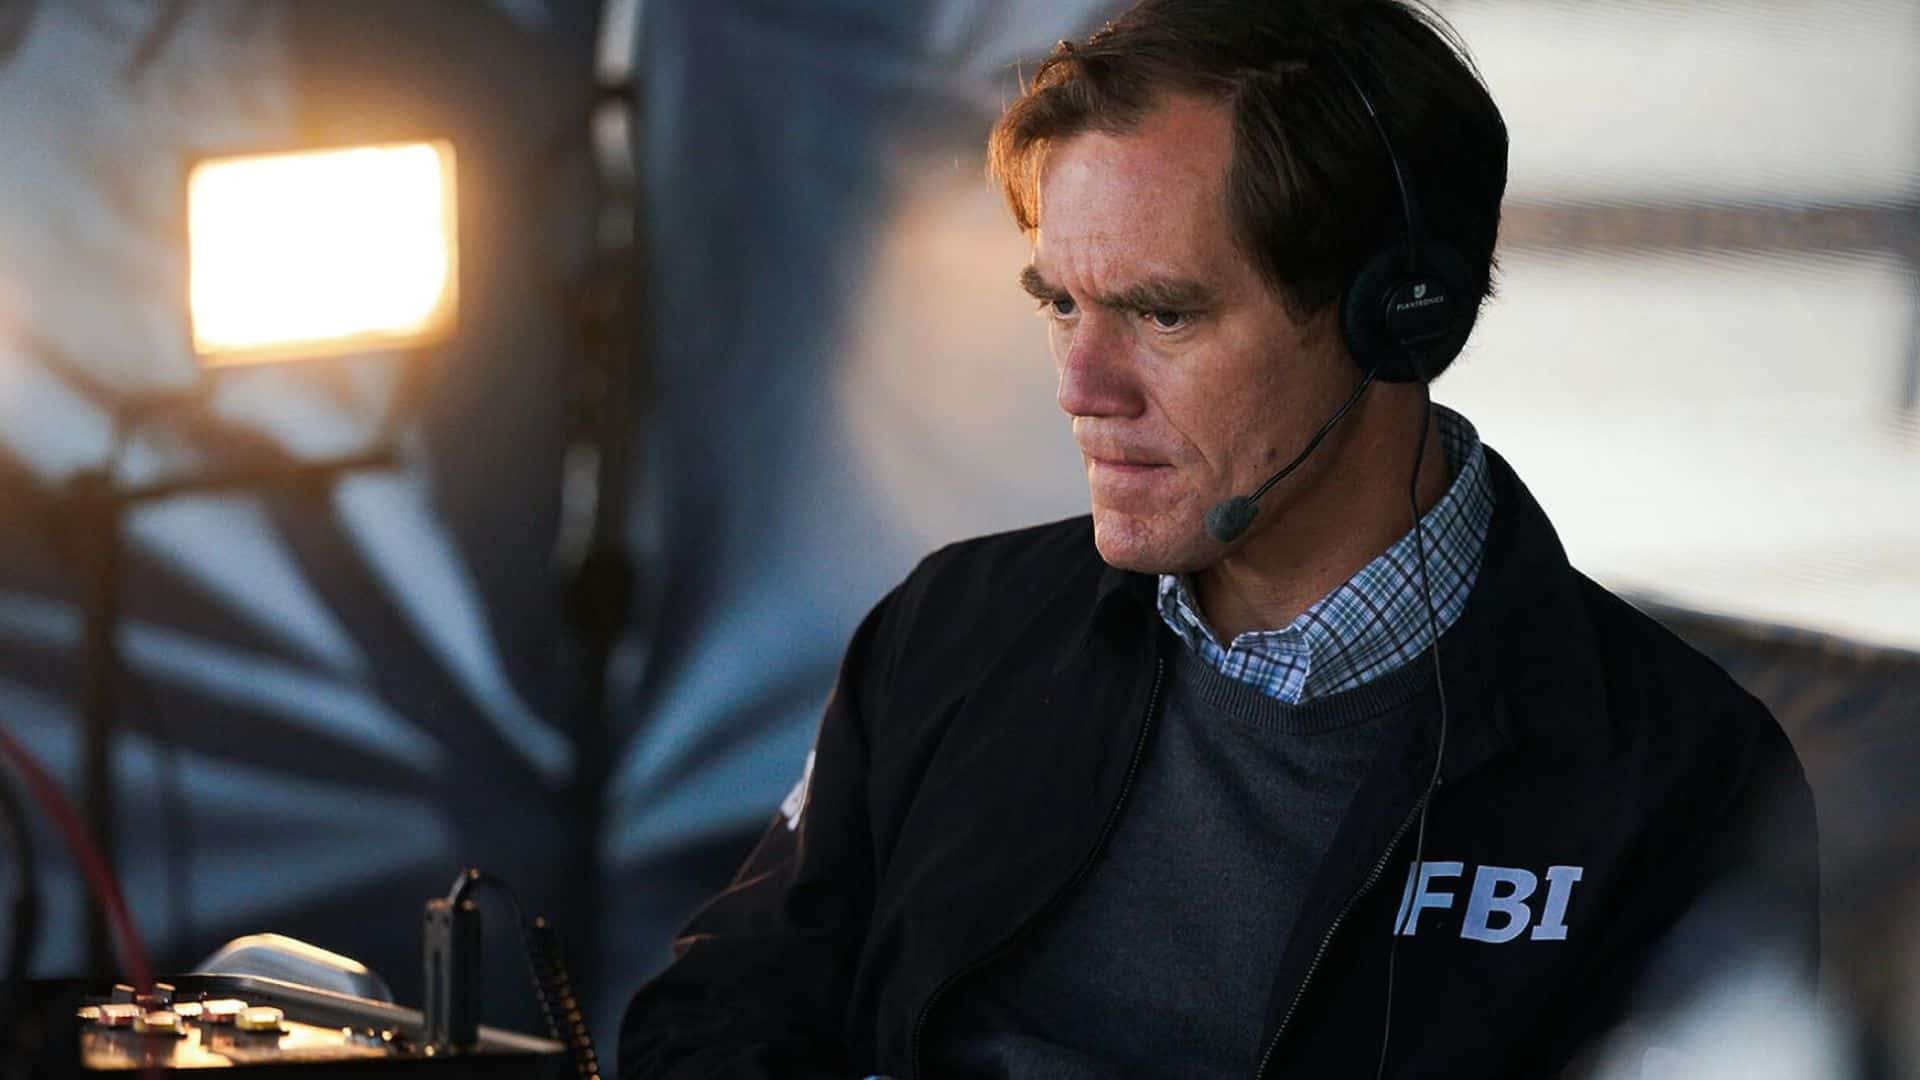 Michael Shannon in an FBI jacket and headset in this image from Spyglass Entertainment.